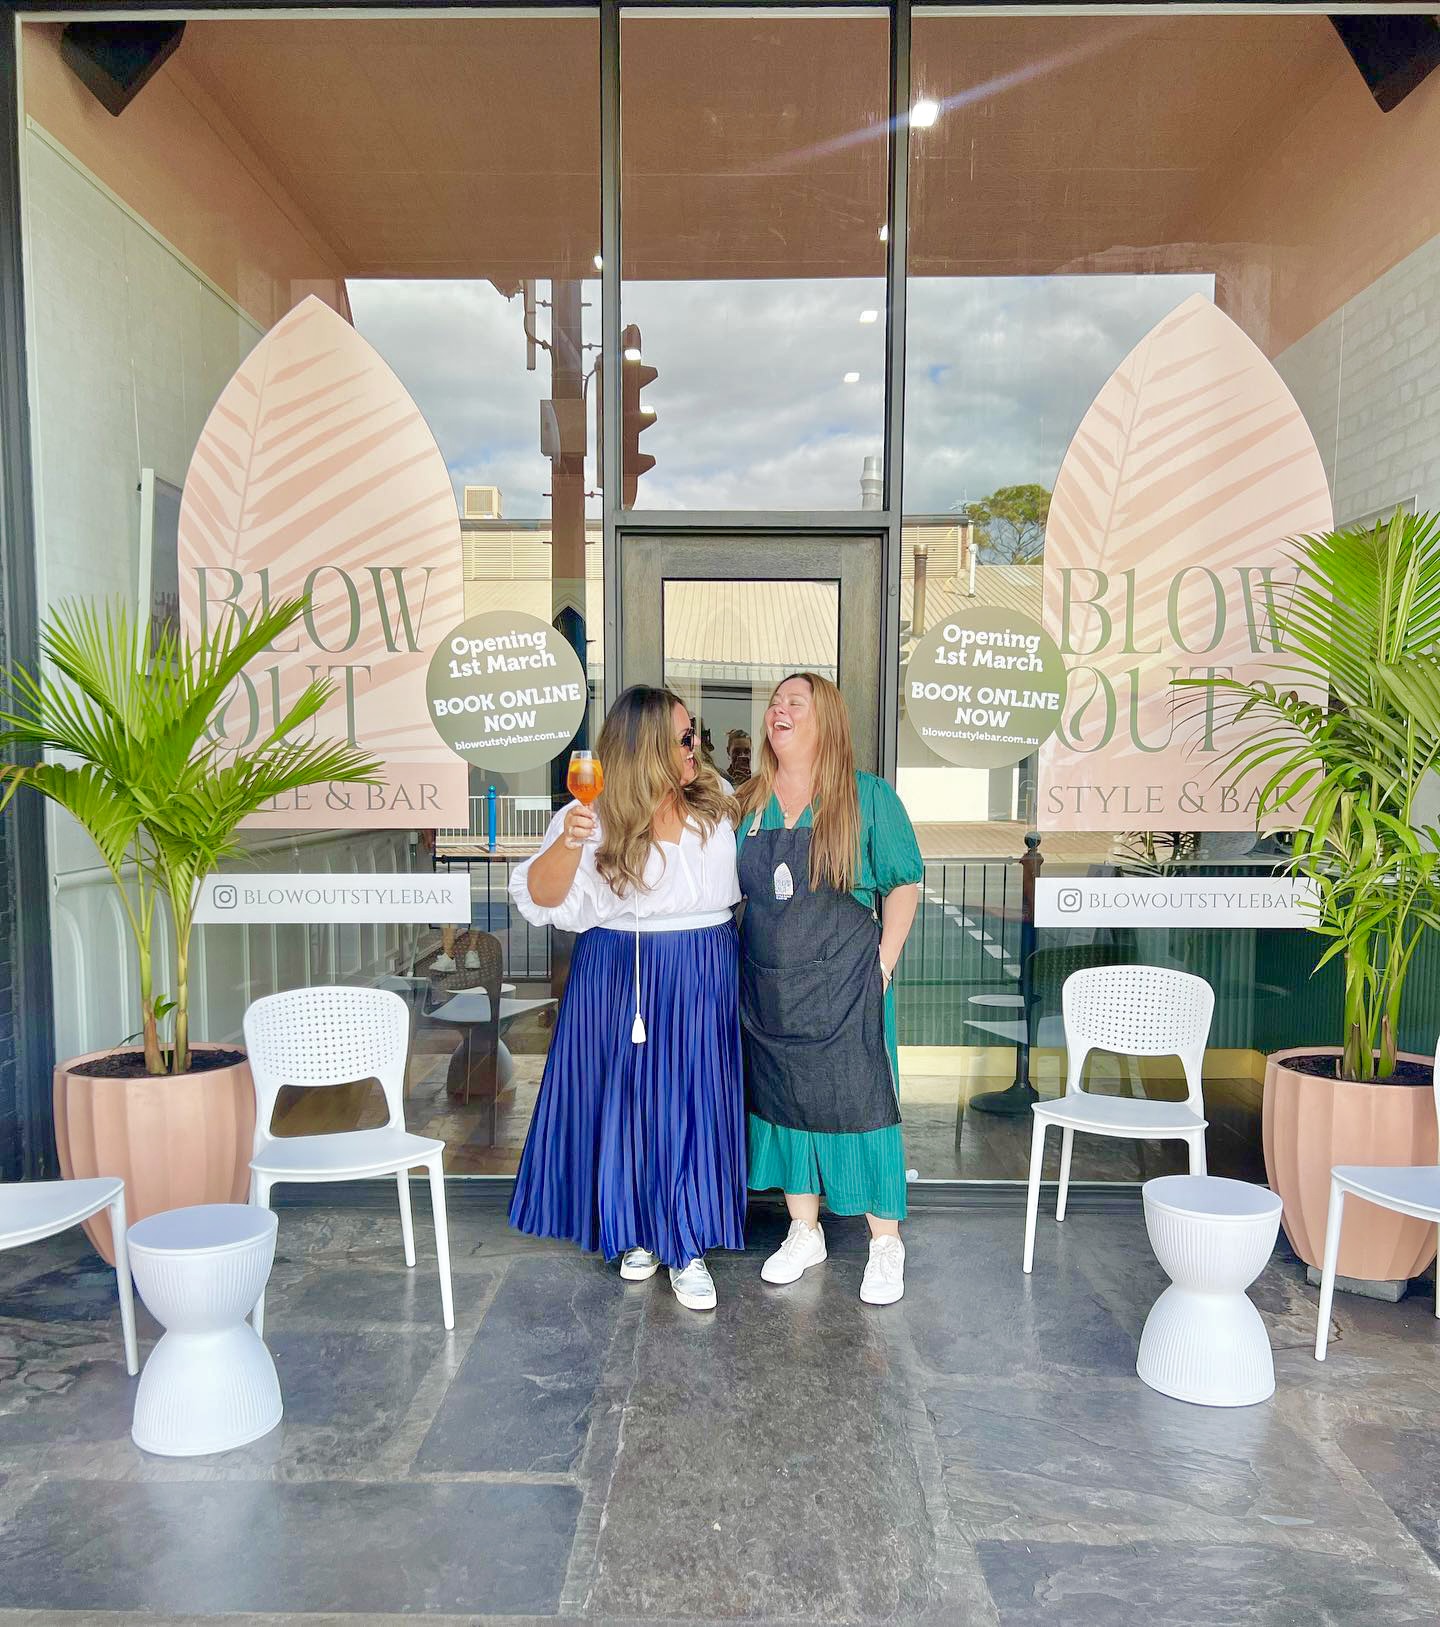 WIN 2x $150 Voucher to the Blow Out Style Bar!